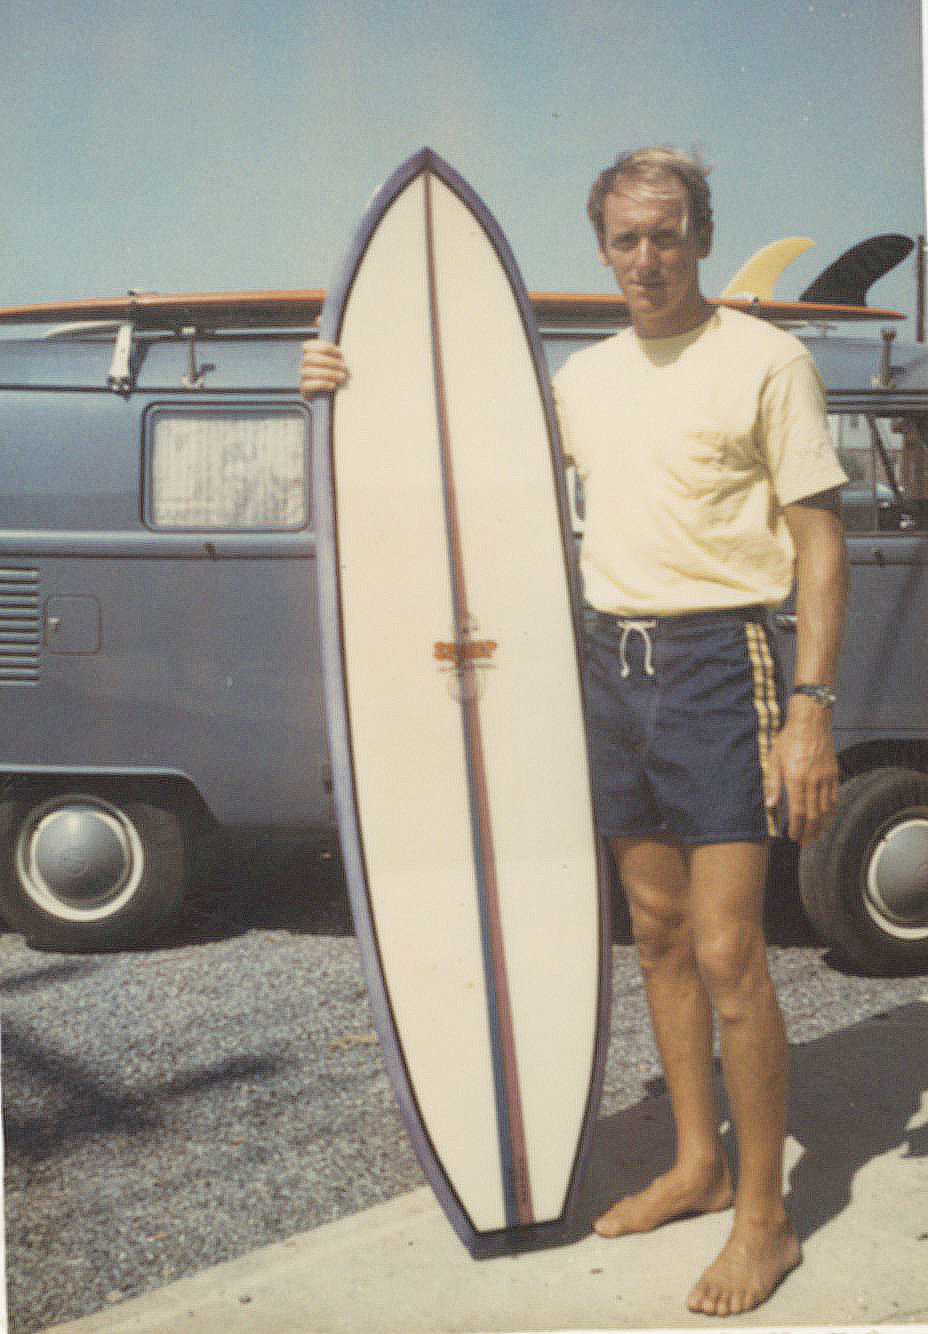 A young Spyder Wright outside his Volkswagen bus in Ocean City, Md. in the 1960s.